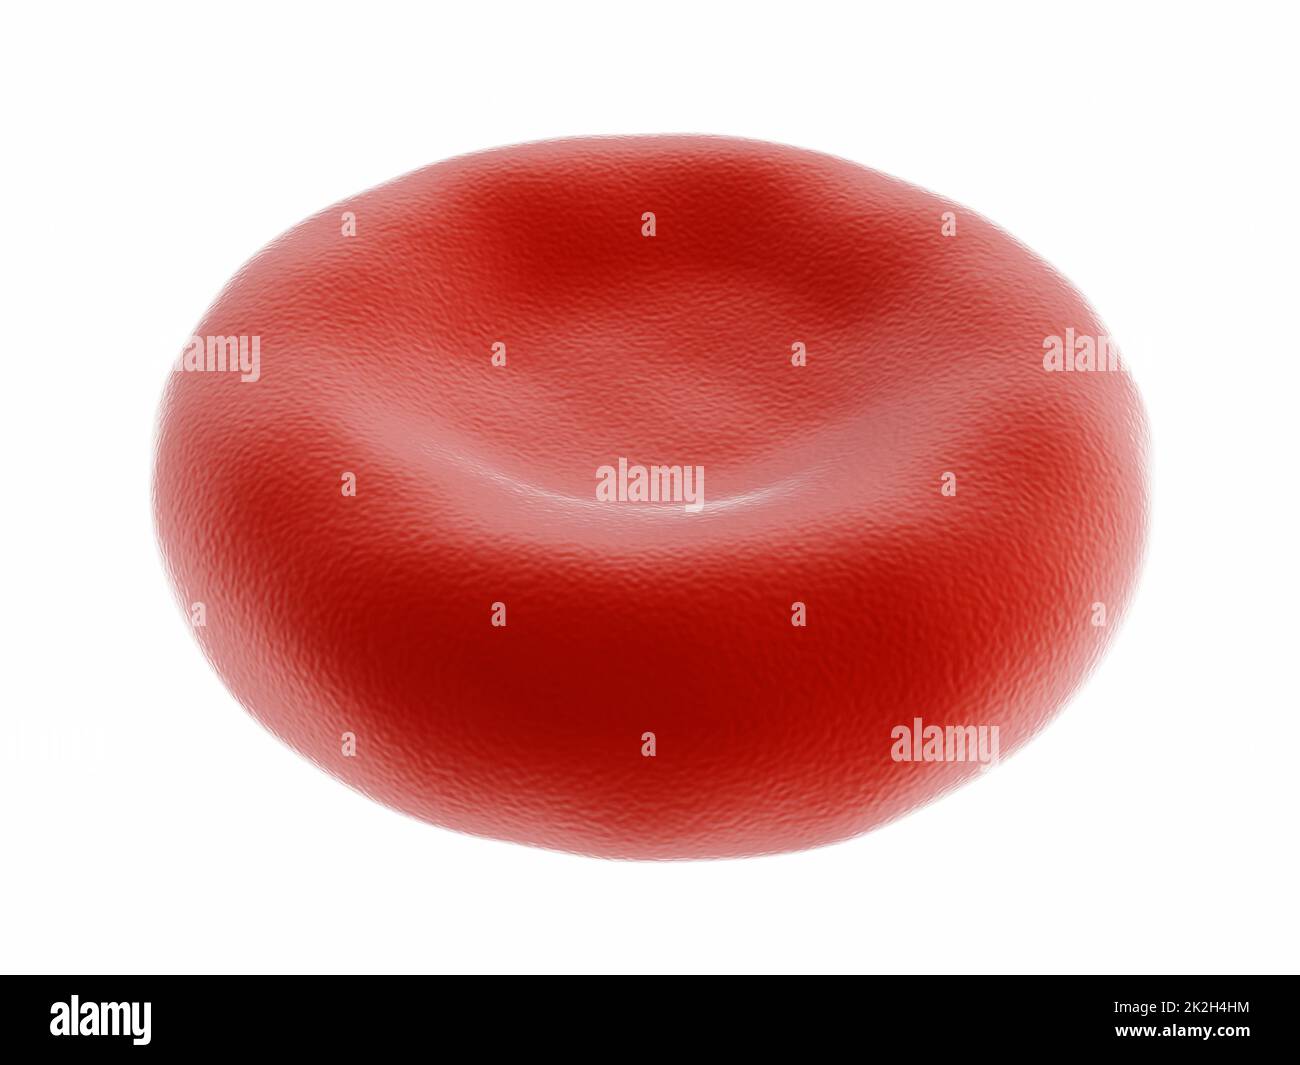 Red blood cell Stock Photo